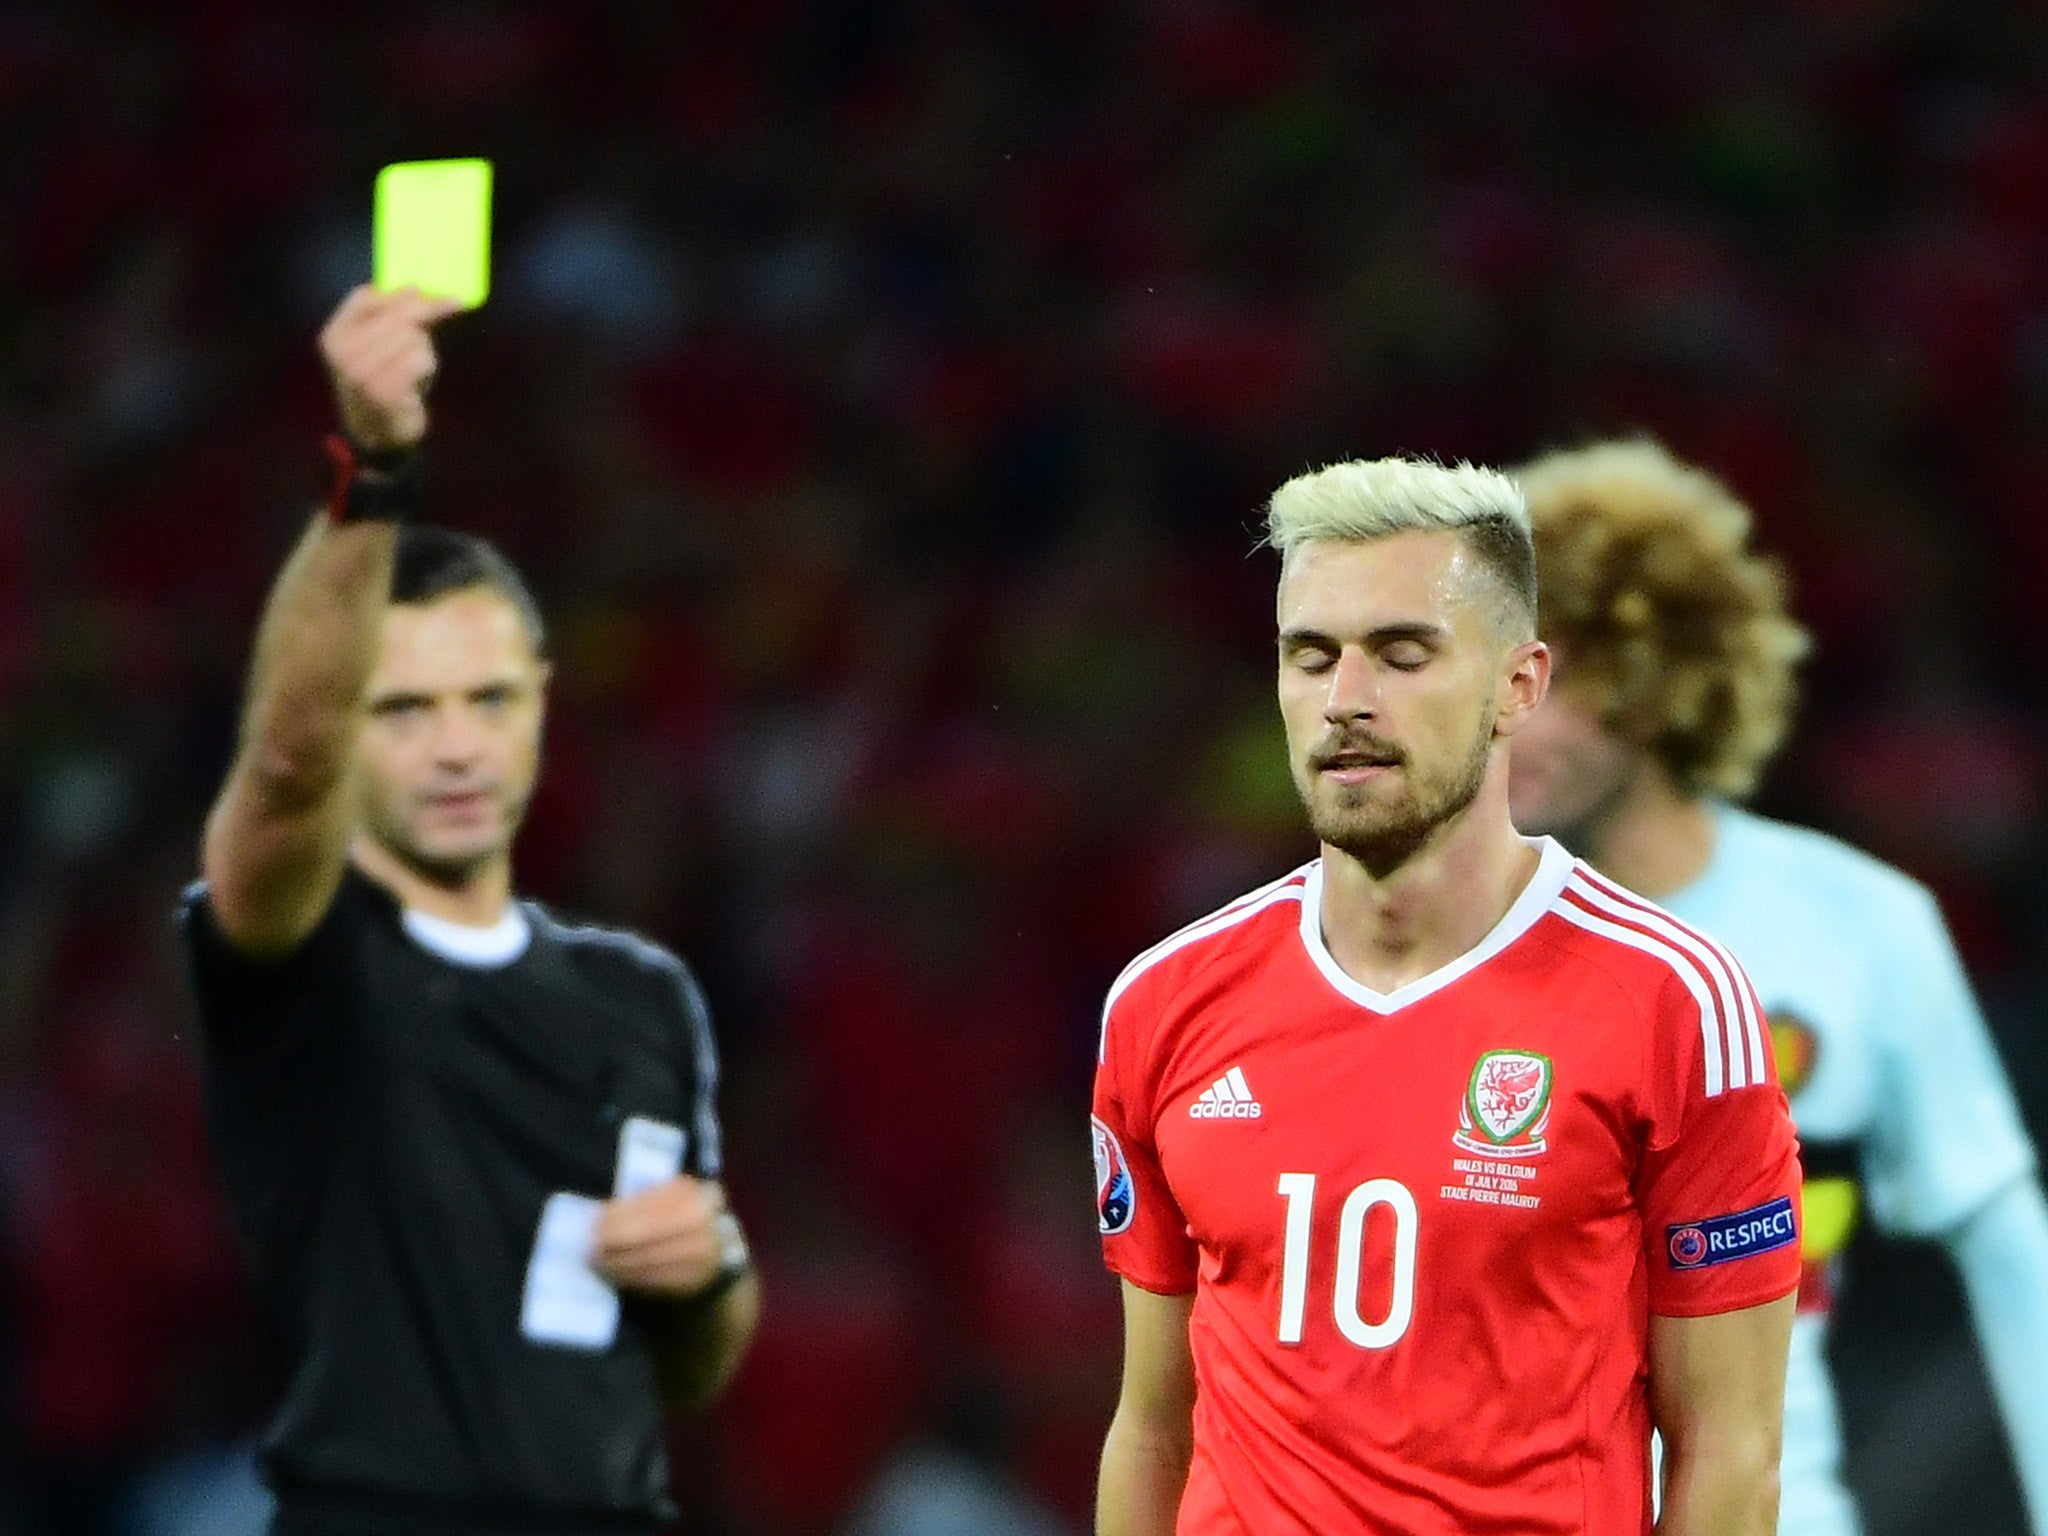 Aaron Ramsey will miss the Euro 2016 semi-final after picking up two yellow cards